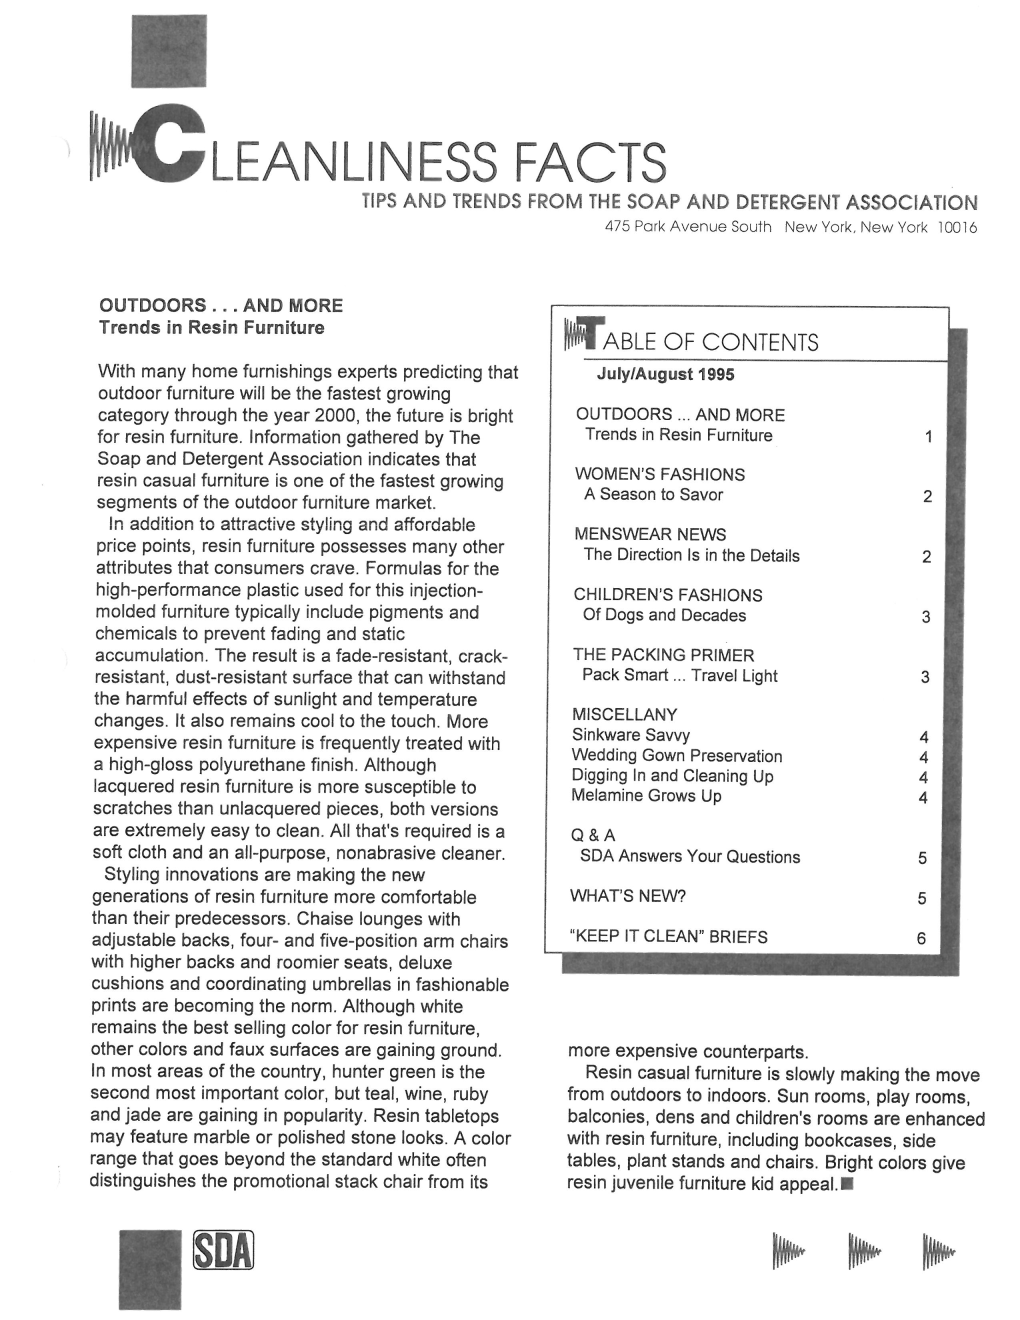 1CLEAN LI NESS FACTS TIPS and TRENDS from the SOAP and DETERGENT ASSOCIATION 475 Park Avenue South New York, New York 10016